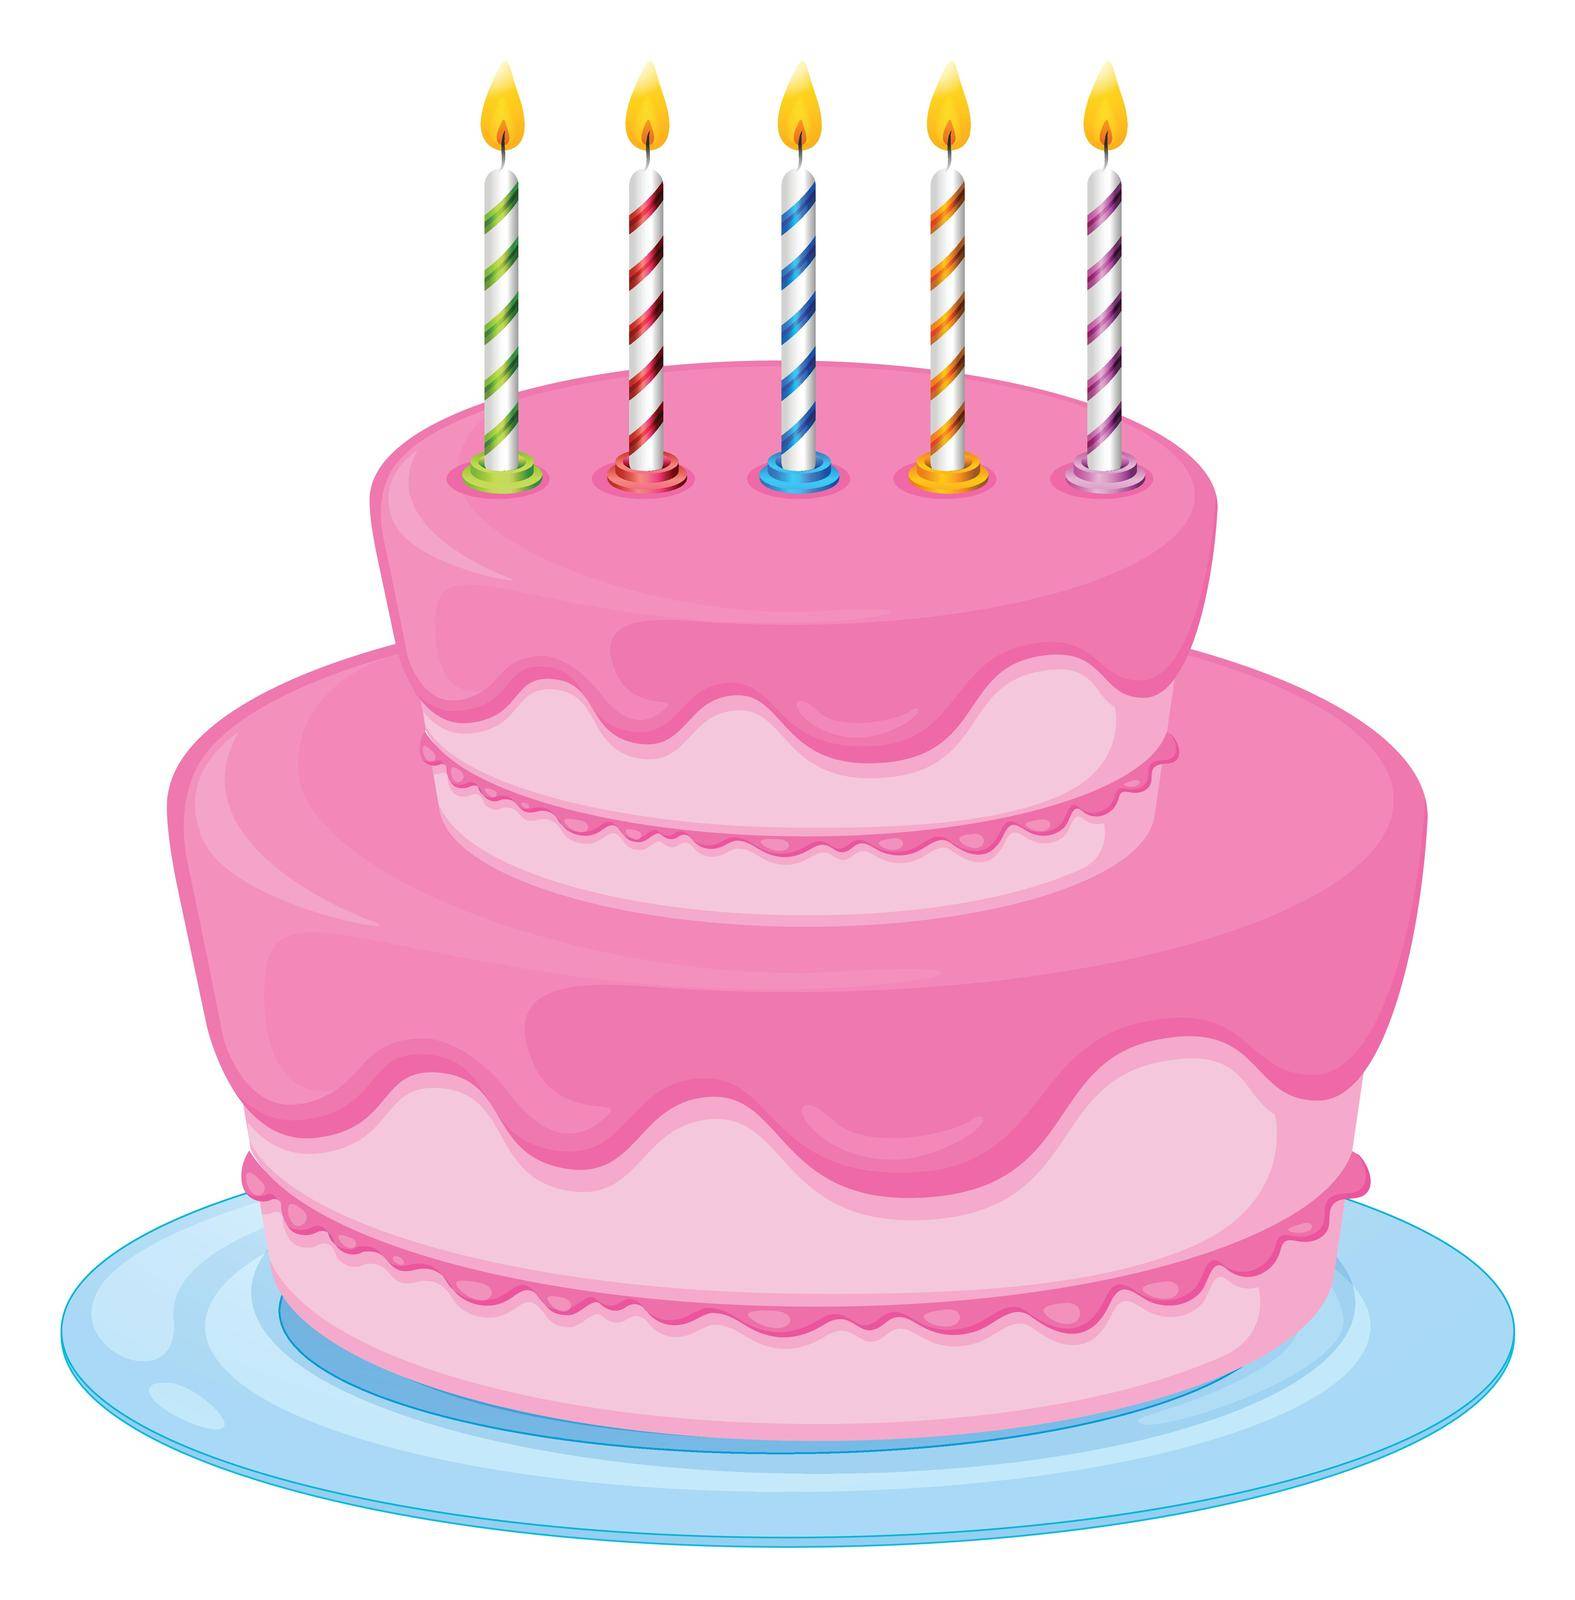 illustration of a pink birthday cake on a white background